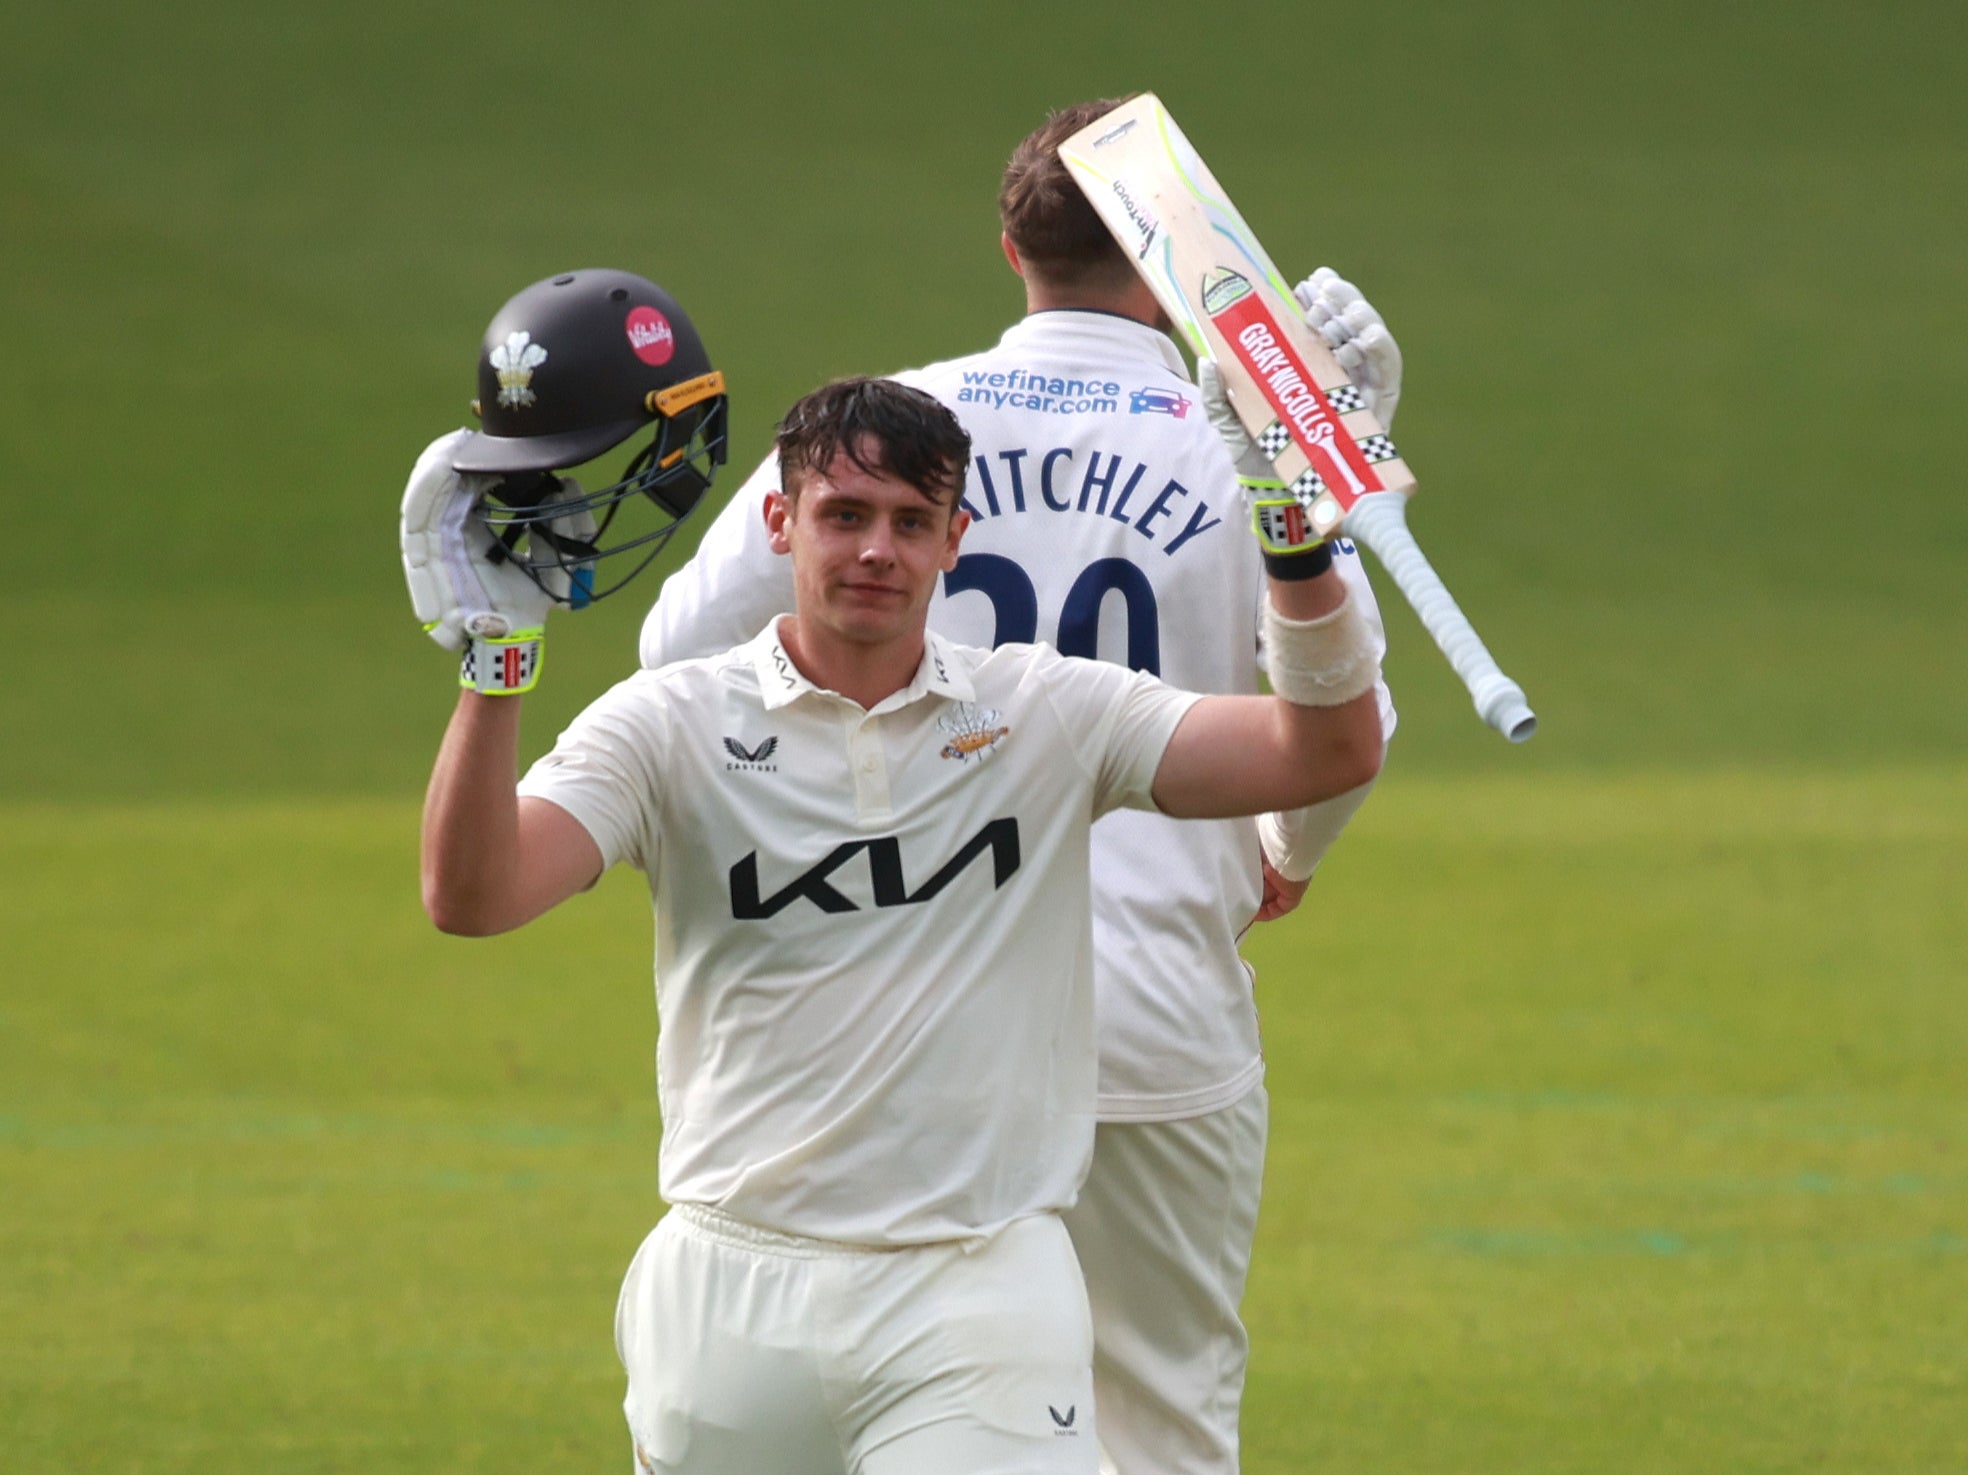 Jamie Smith scored another century for Surrey against Essex on Sunday